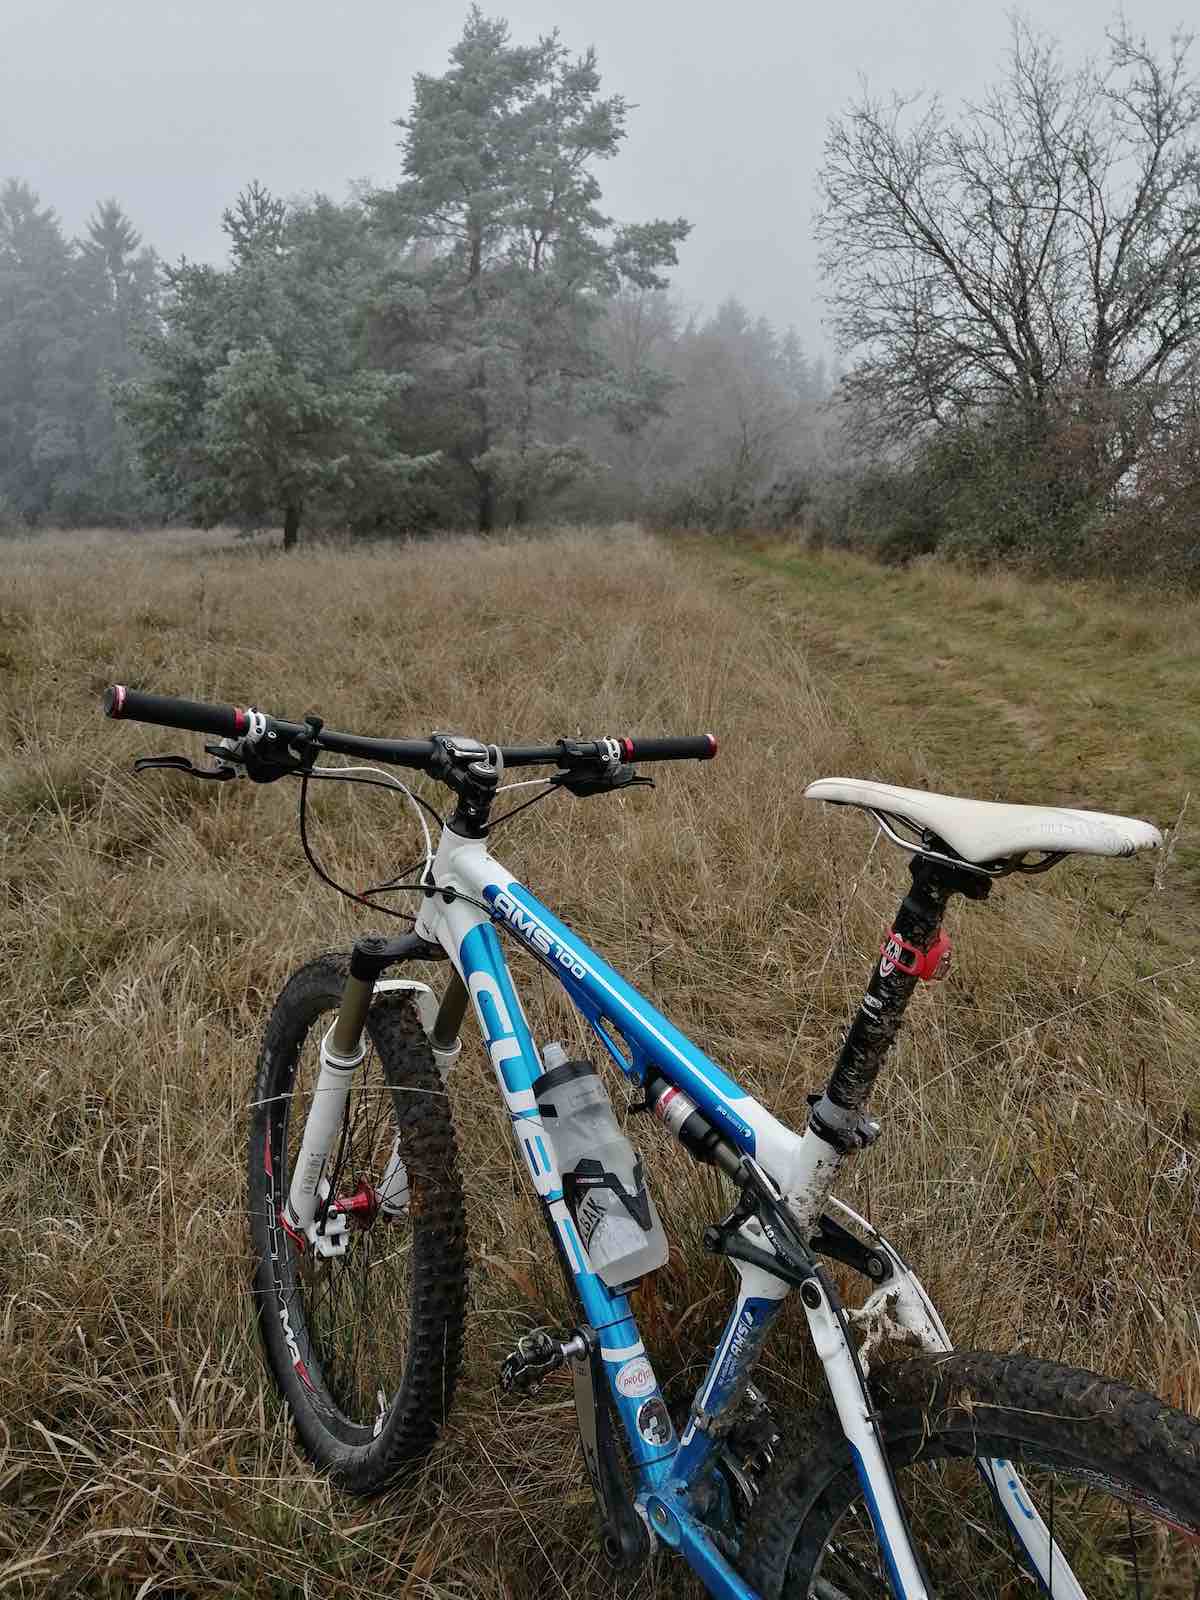 bikerumor pic of the day Bavaria near Regensburg cube mountain bike in a frozen field with fog and trees in the background.